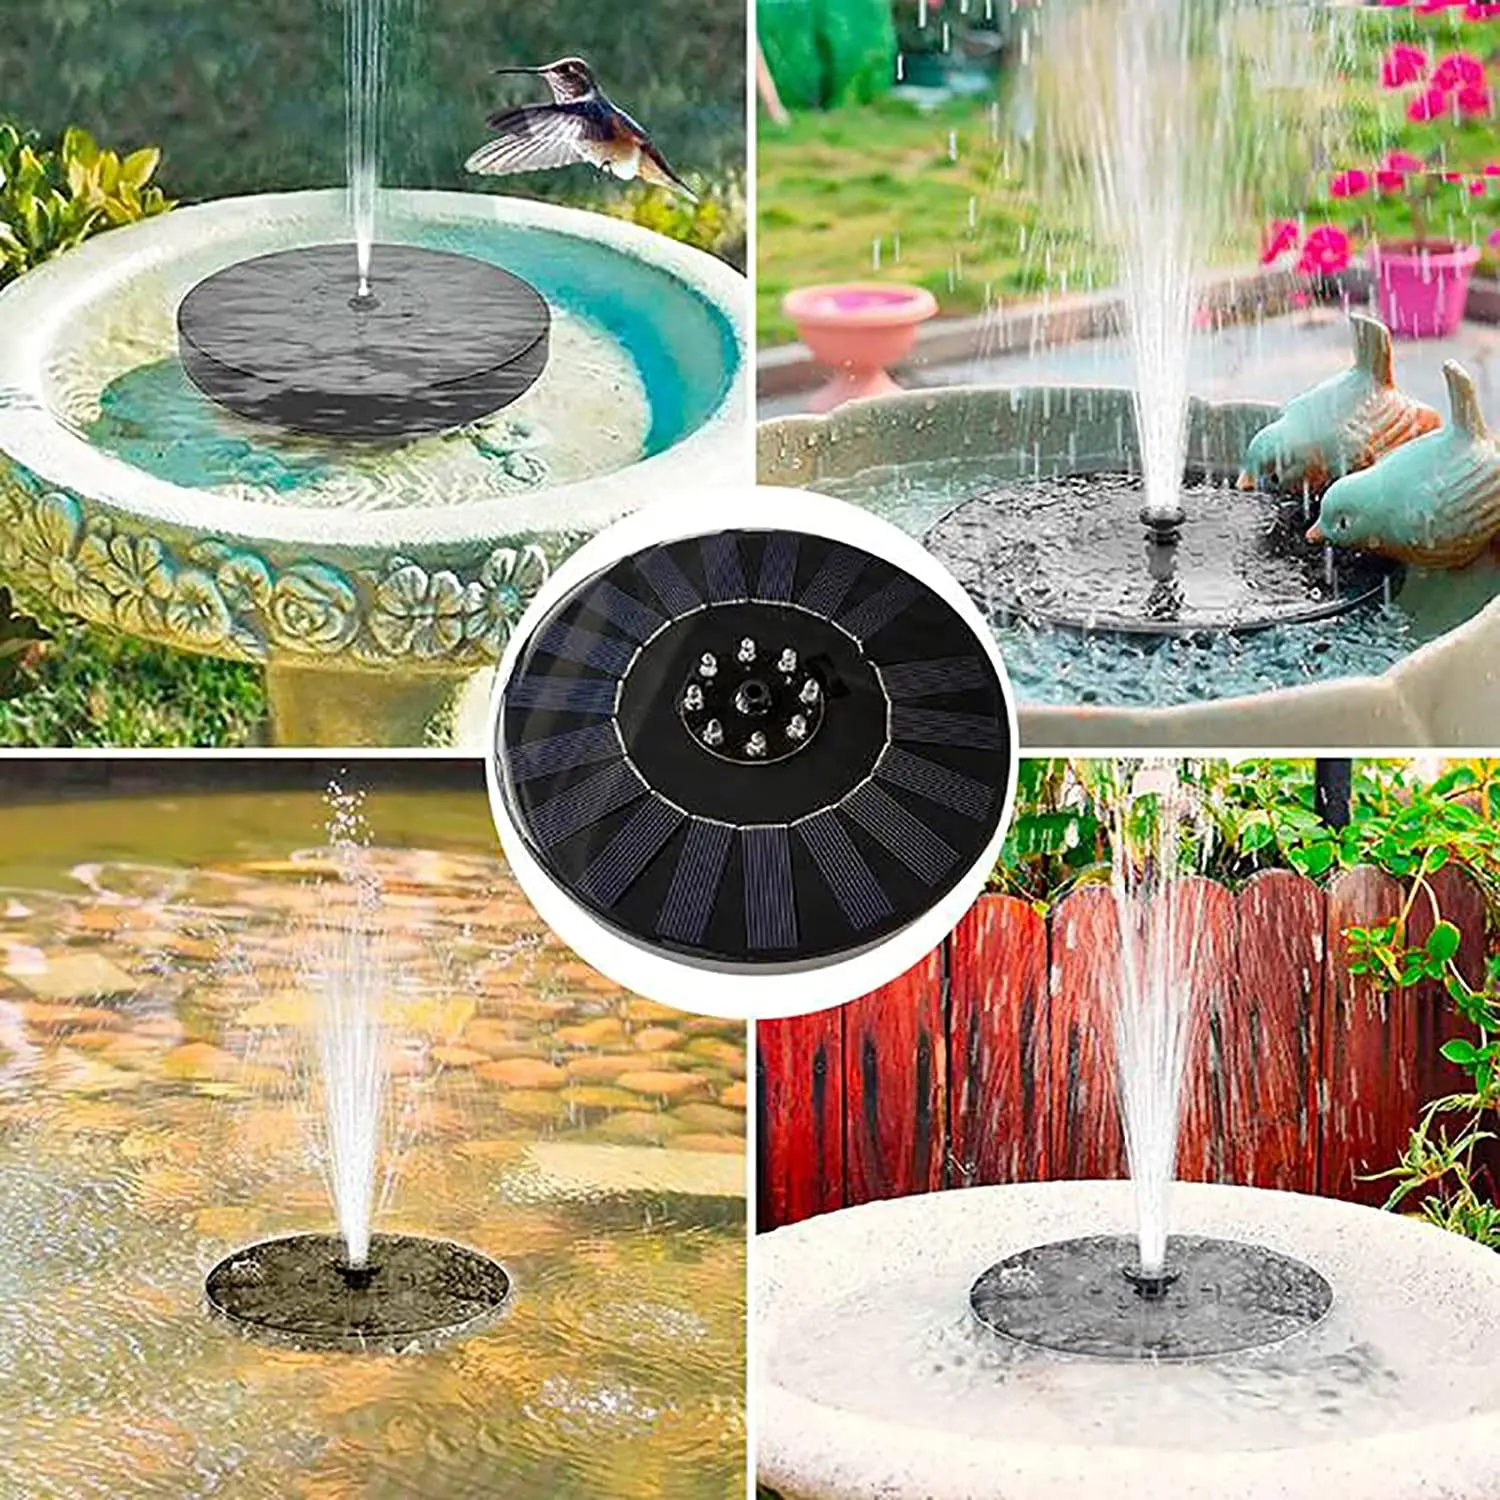 Wow your friends Garden Solar Water Ornaments also doubles as a Bird Bath for your Garden or Patio Garden Mile Solar Water Fountains Beautiful Rustic Tumbling Water Feature Ceramic Neptune